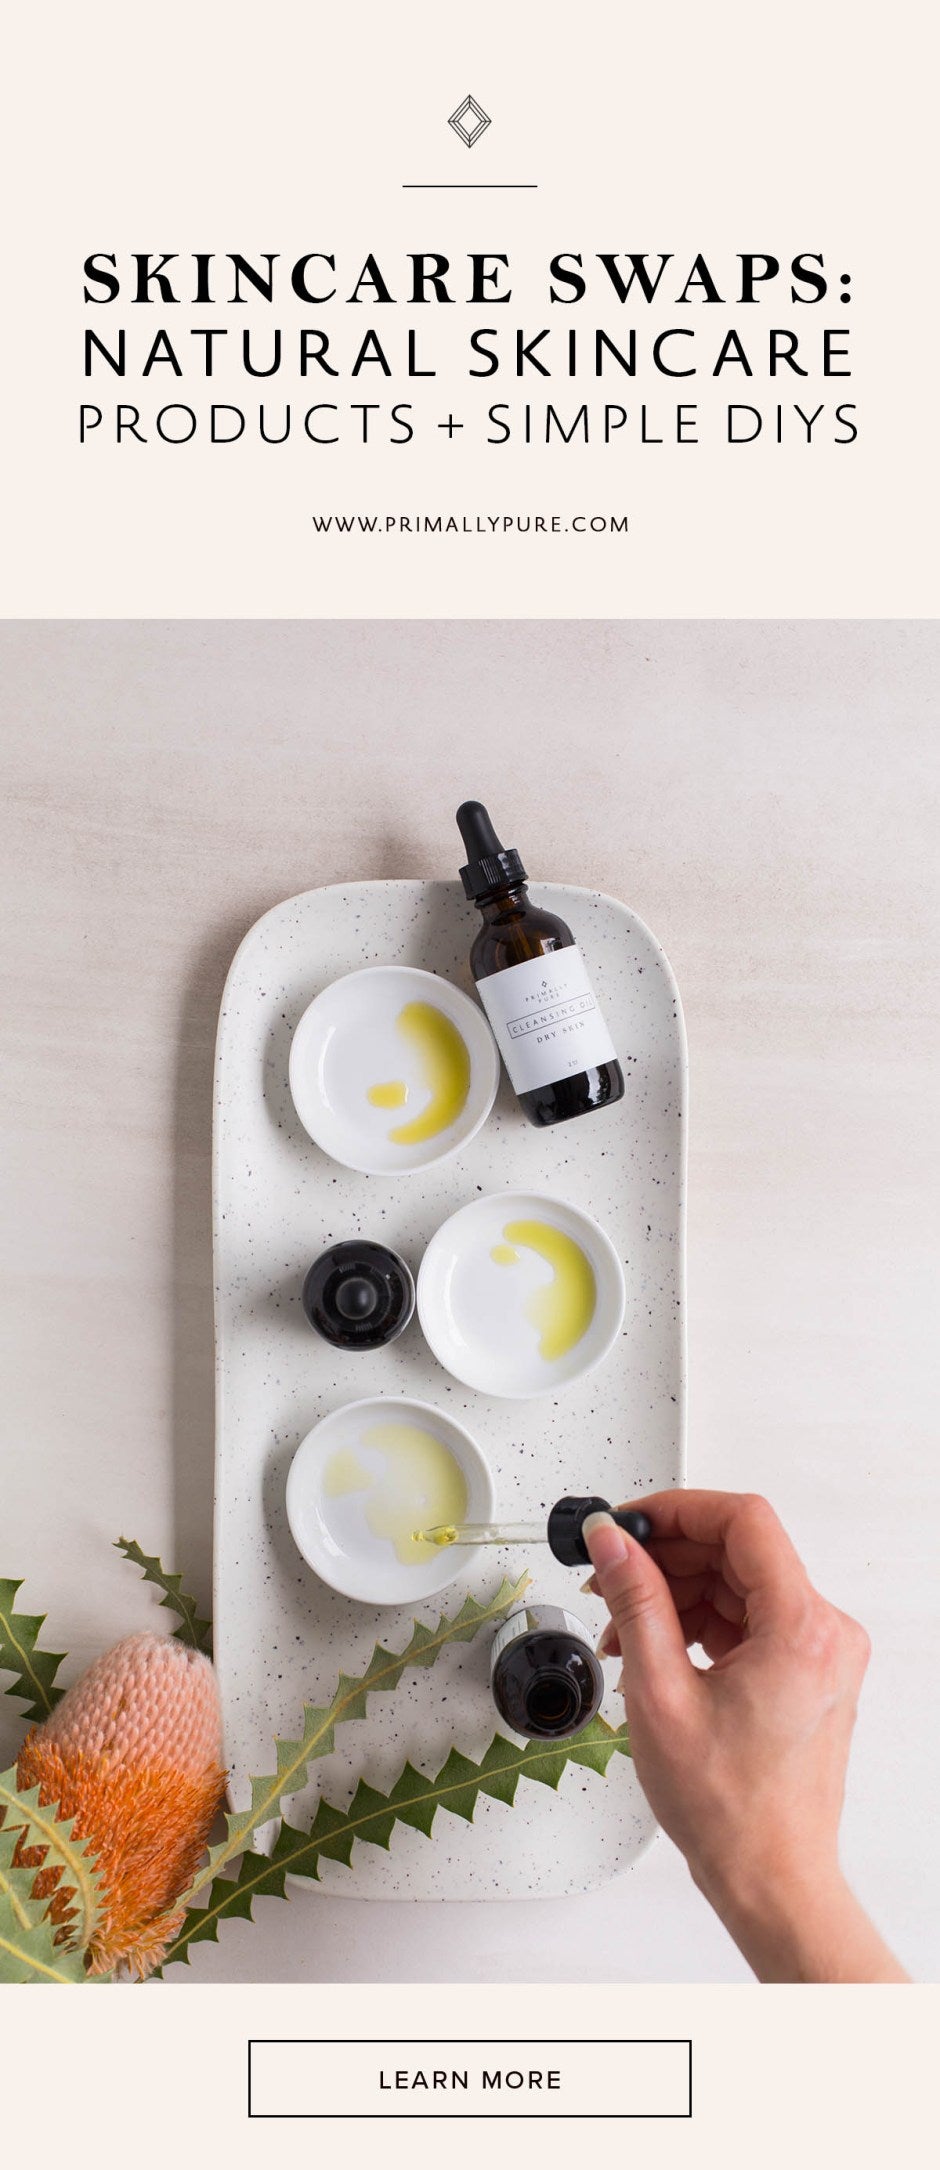 One simple skincare swap can make a big difference for your skin health. Here are our picks for the best natural skincare products + tips for simple DIYs. | Primally Pure Skincare